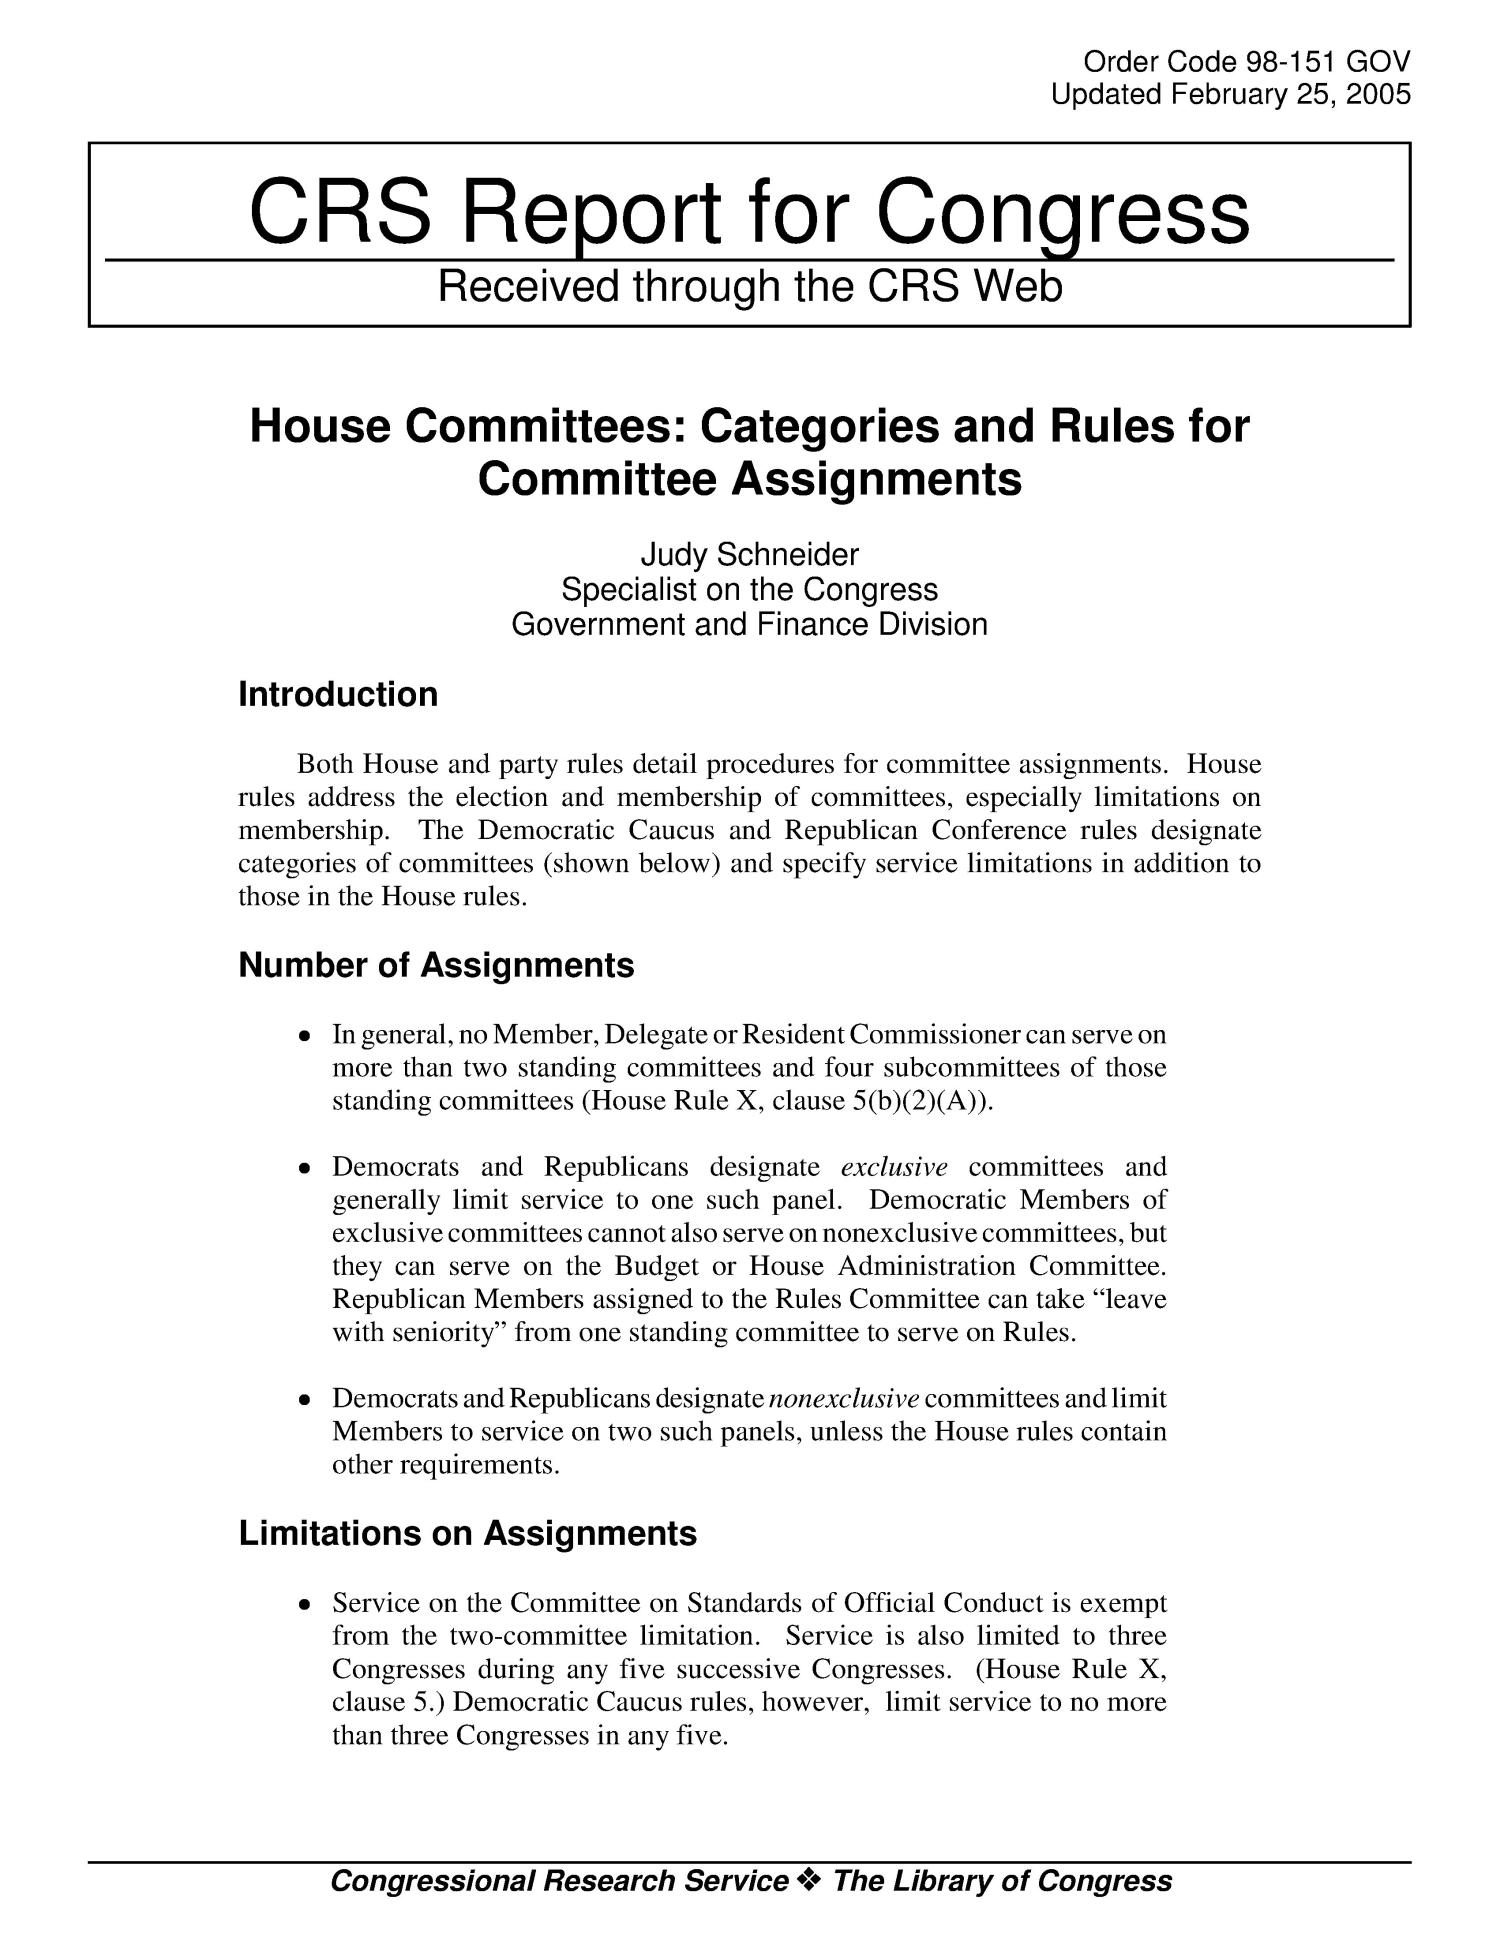 committee assignment in the house